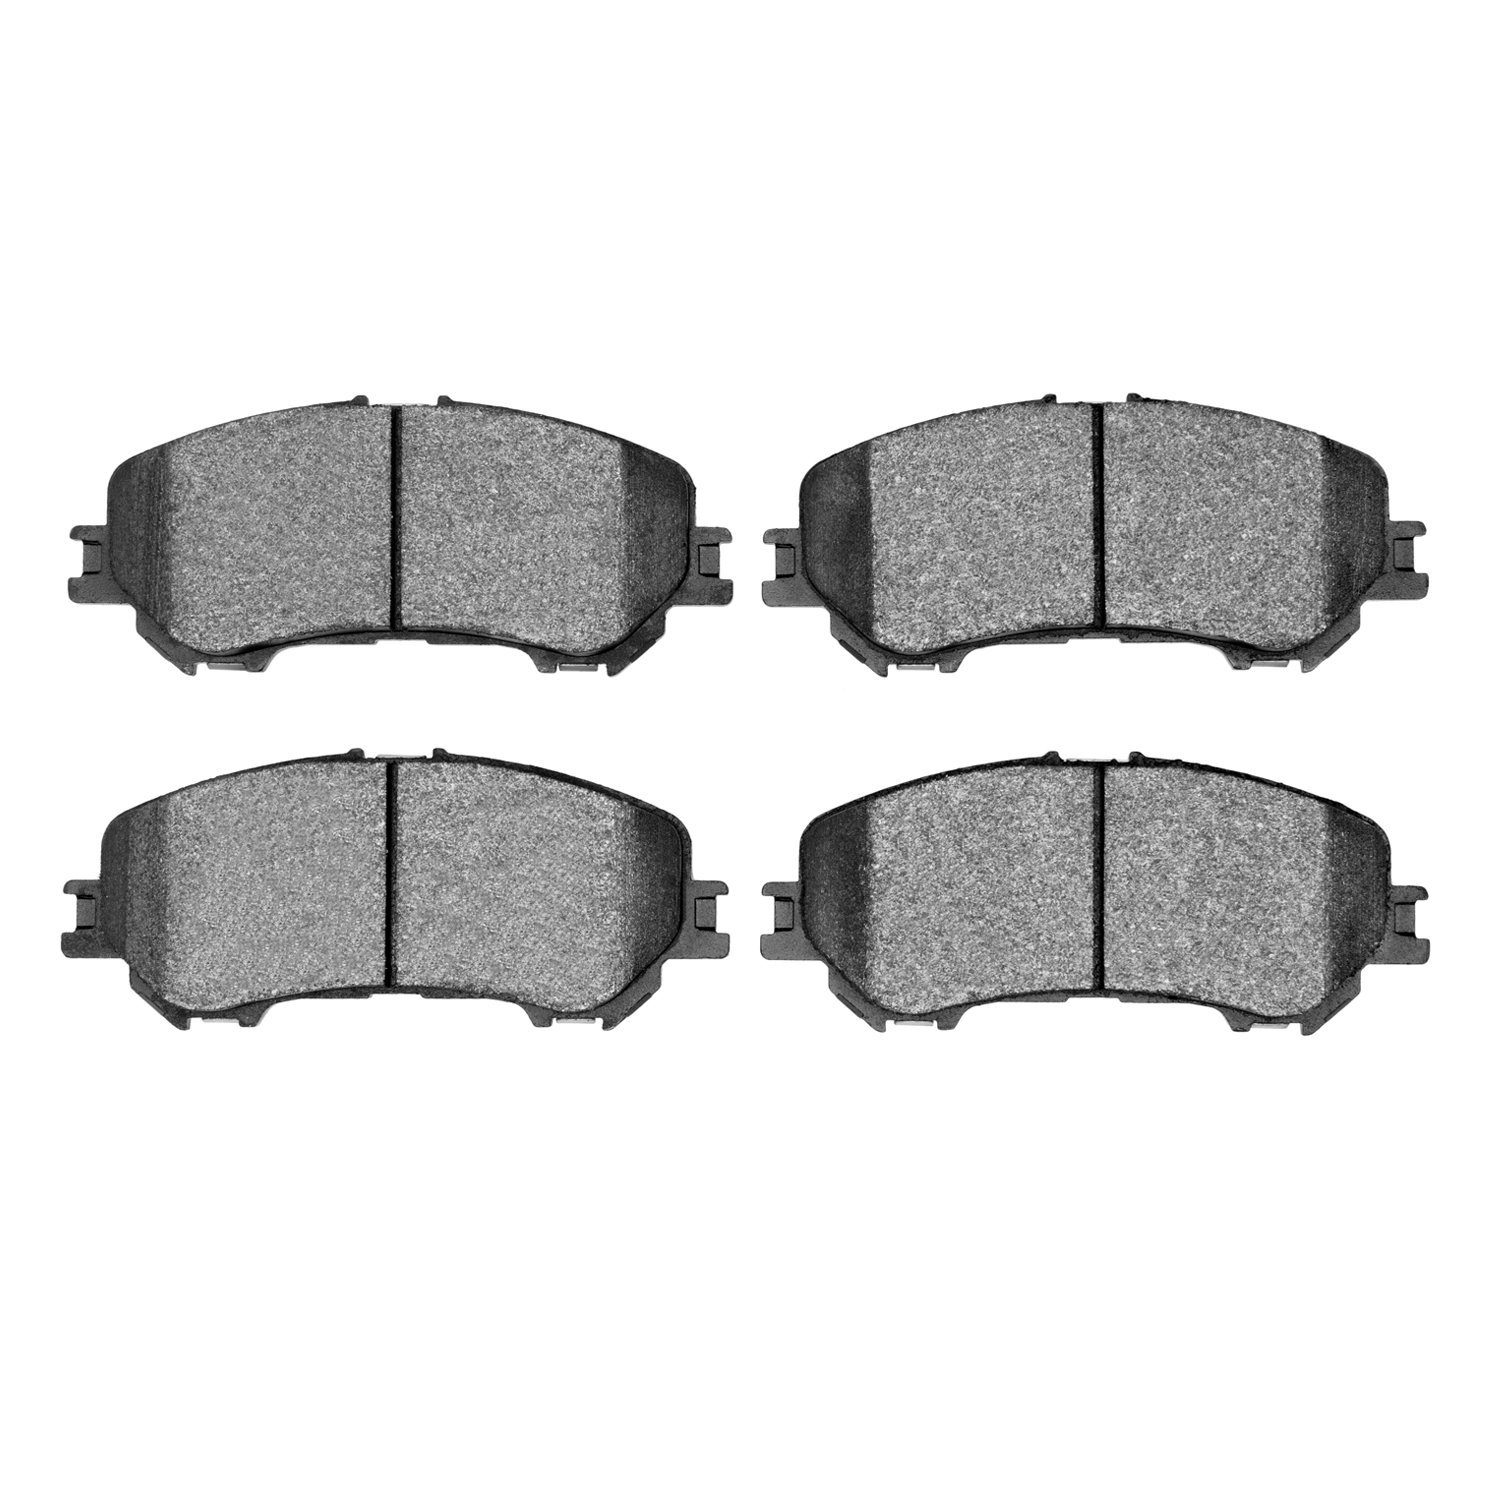 1310-1737-00 3000-Series Ceramic Brake Pads, Fits Select Multiple Makes/Models, Position: Front